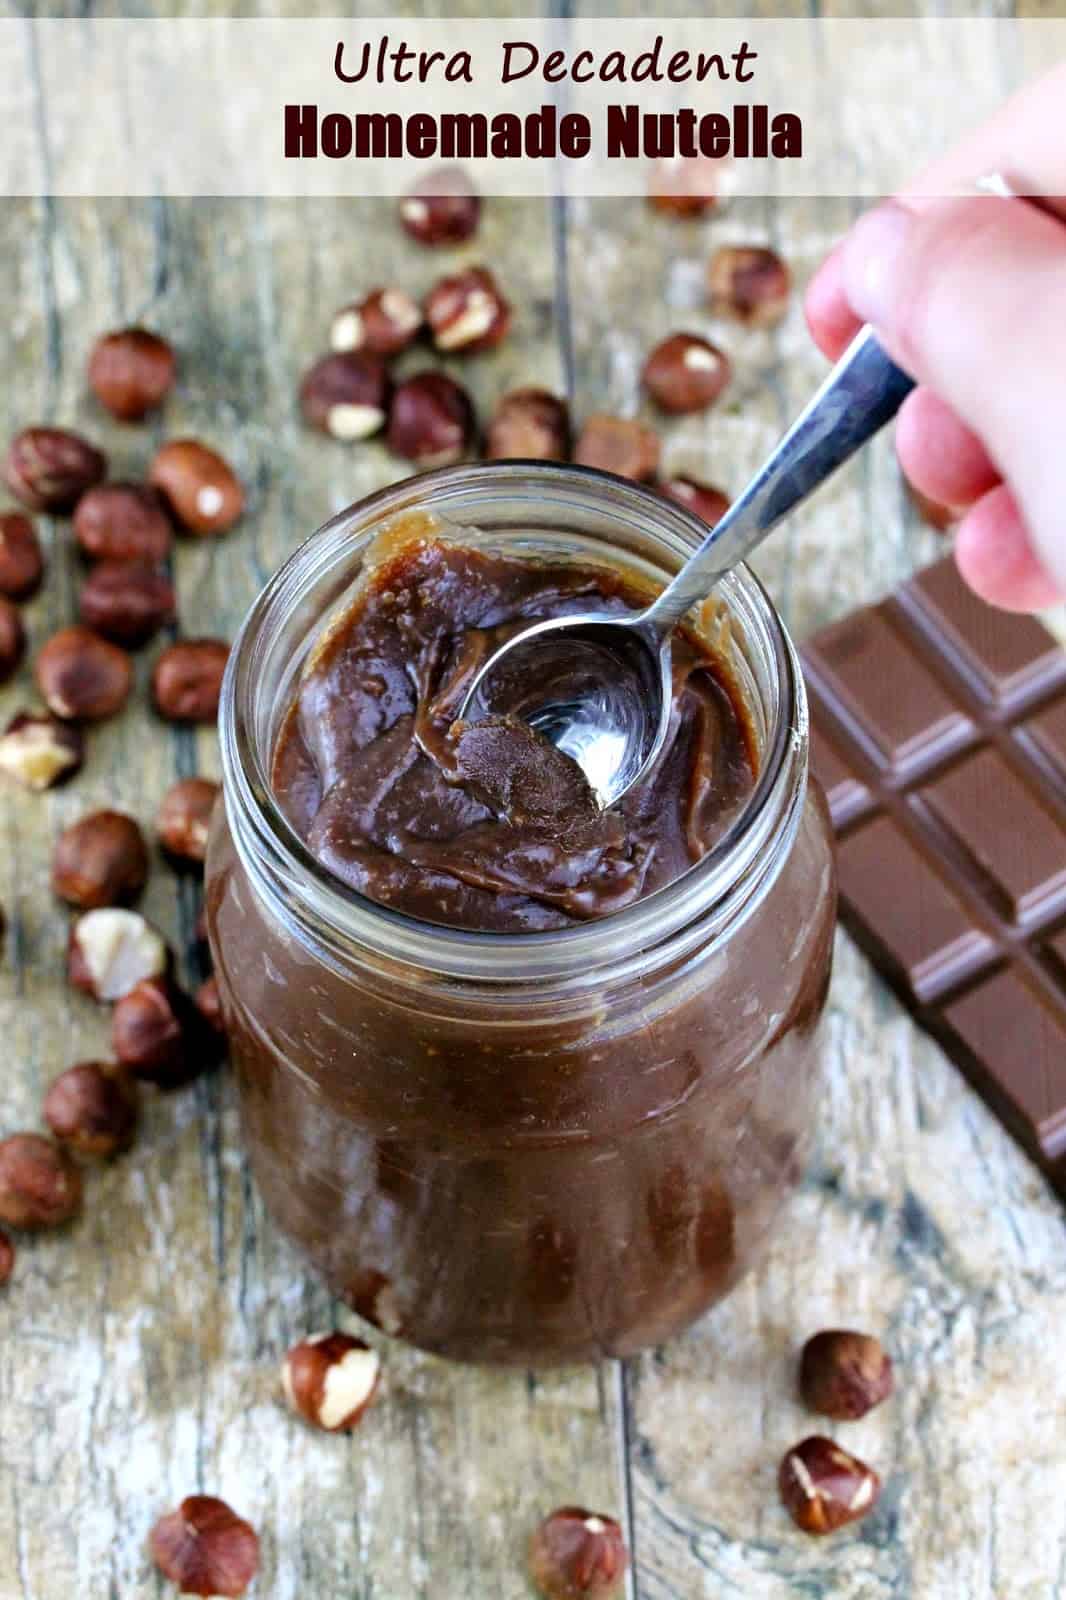 Ultra Decadent Homemade Nutella: A spoonful of creamy homemade Nutella is lifted from a mason jar. Nutella can easily be made at home with chocolate and hazelnuts and a few other simple ingredients. 